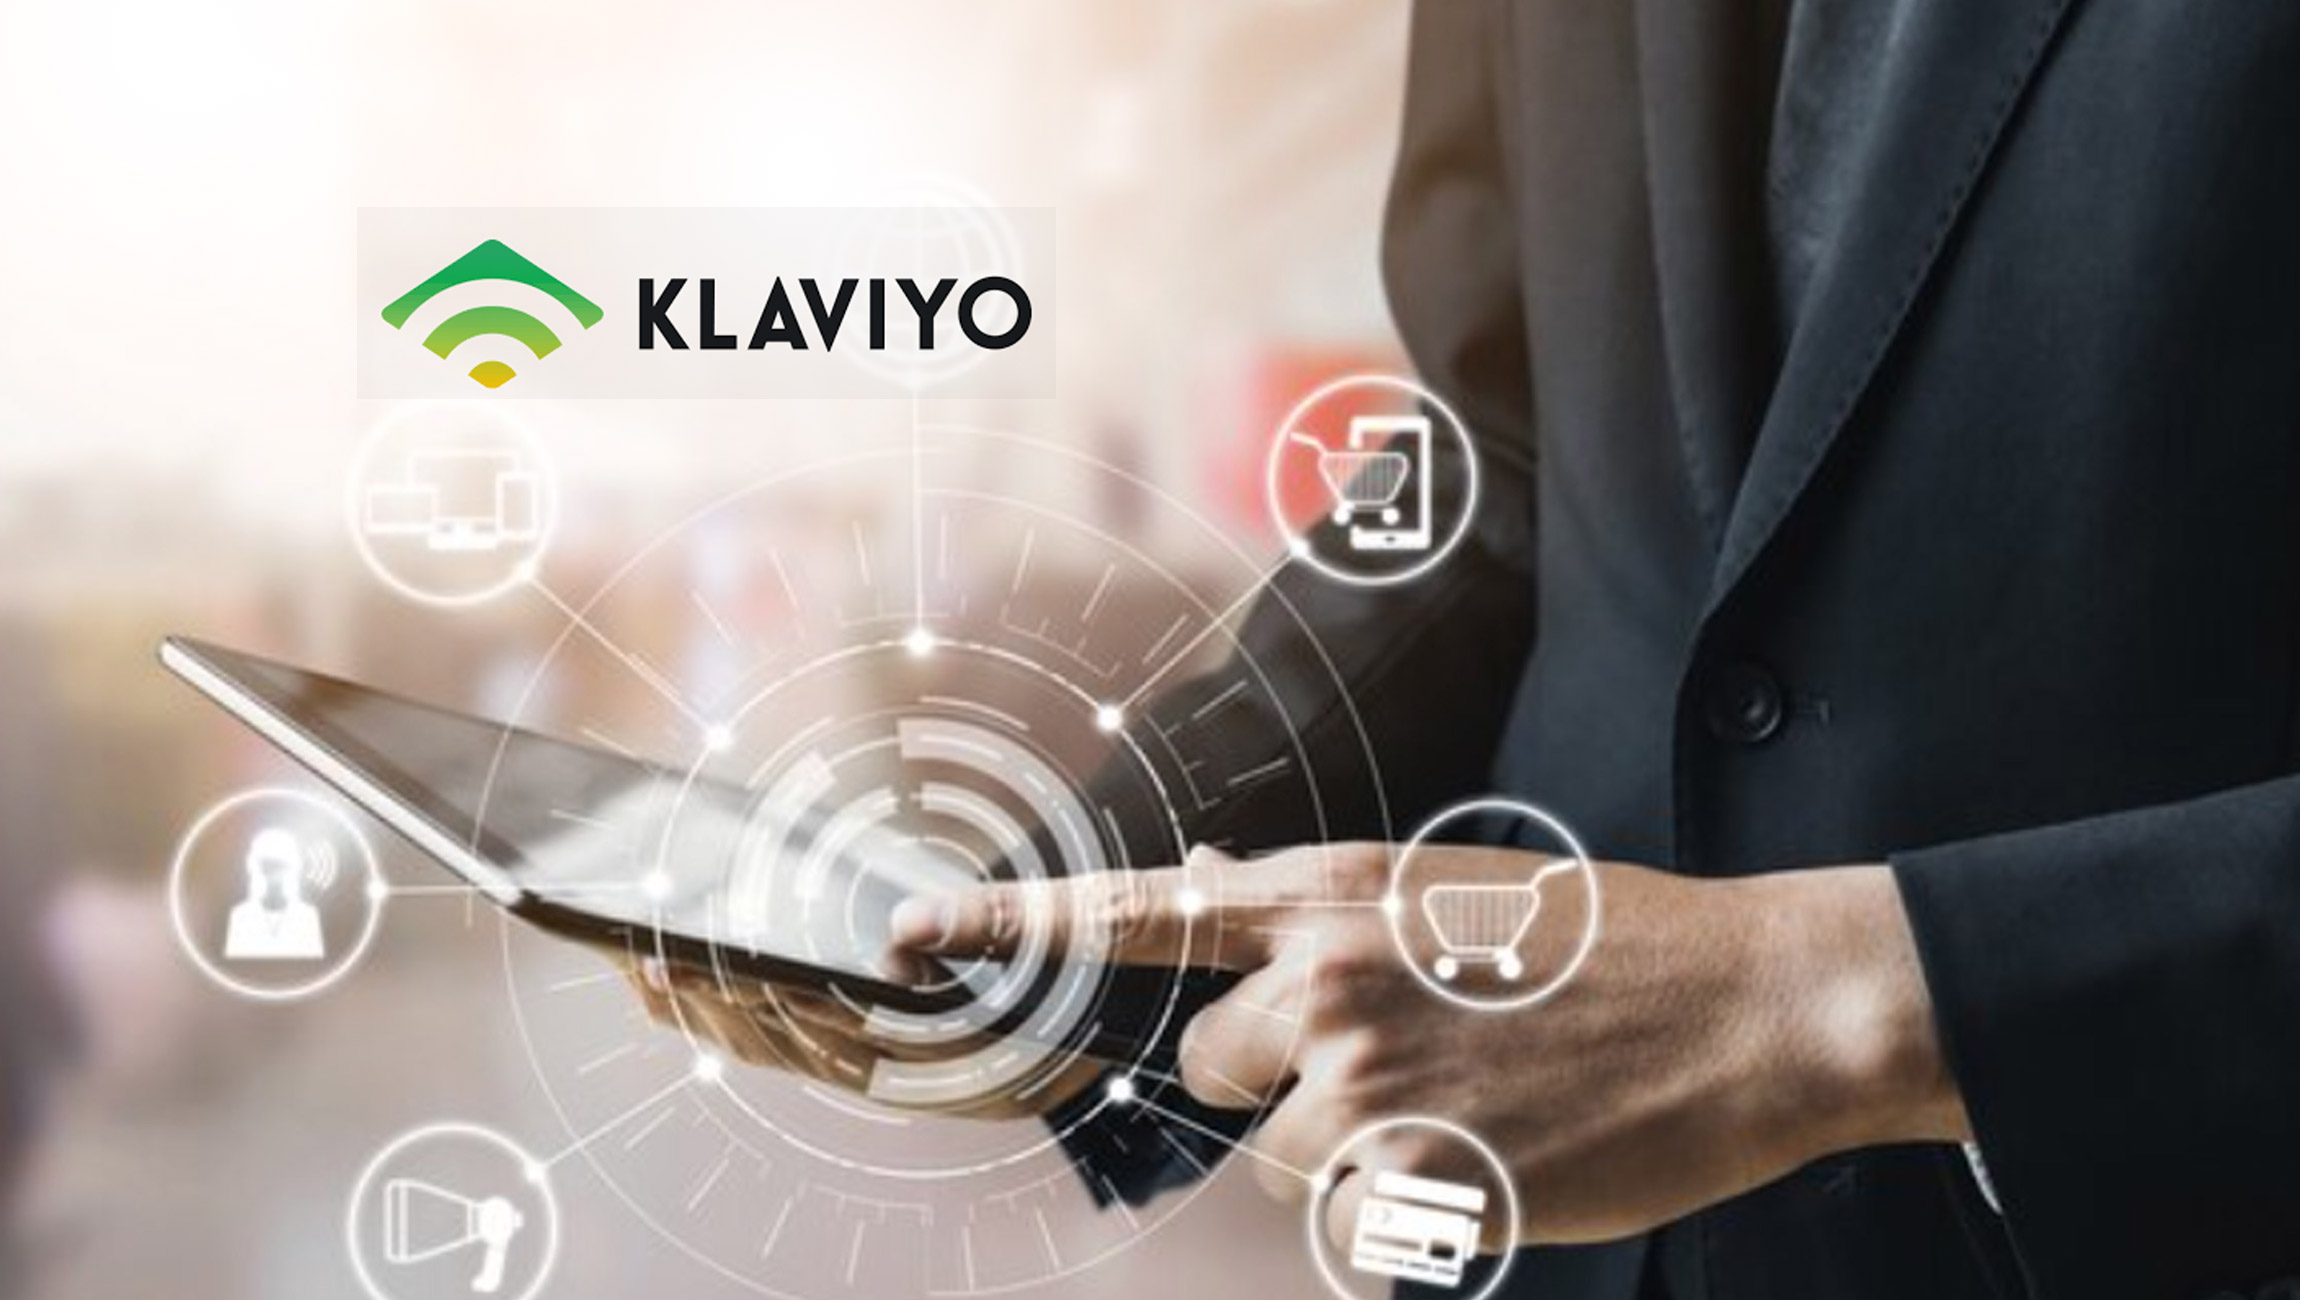 Klaviyo Releases New Features to Enhance Multi-Channel Communication